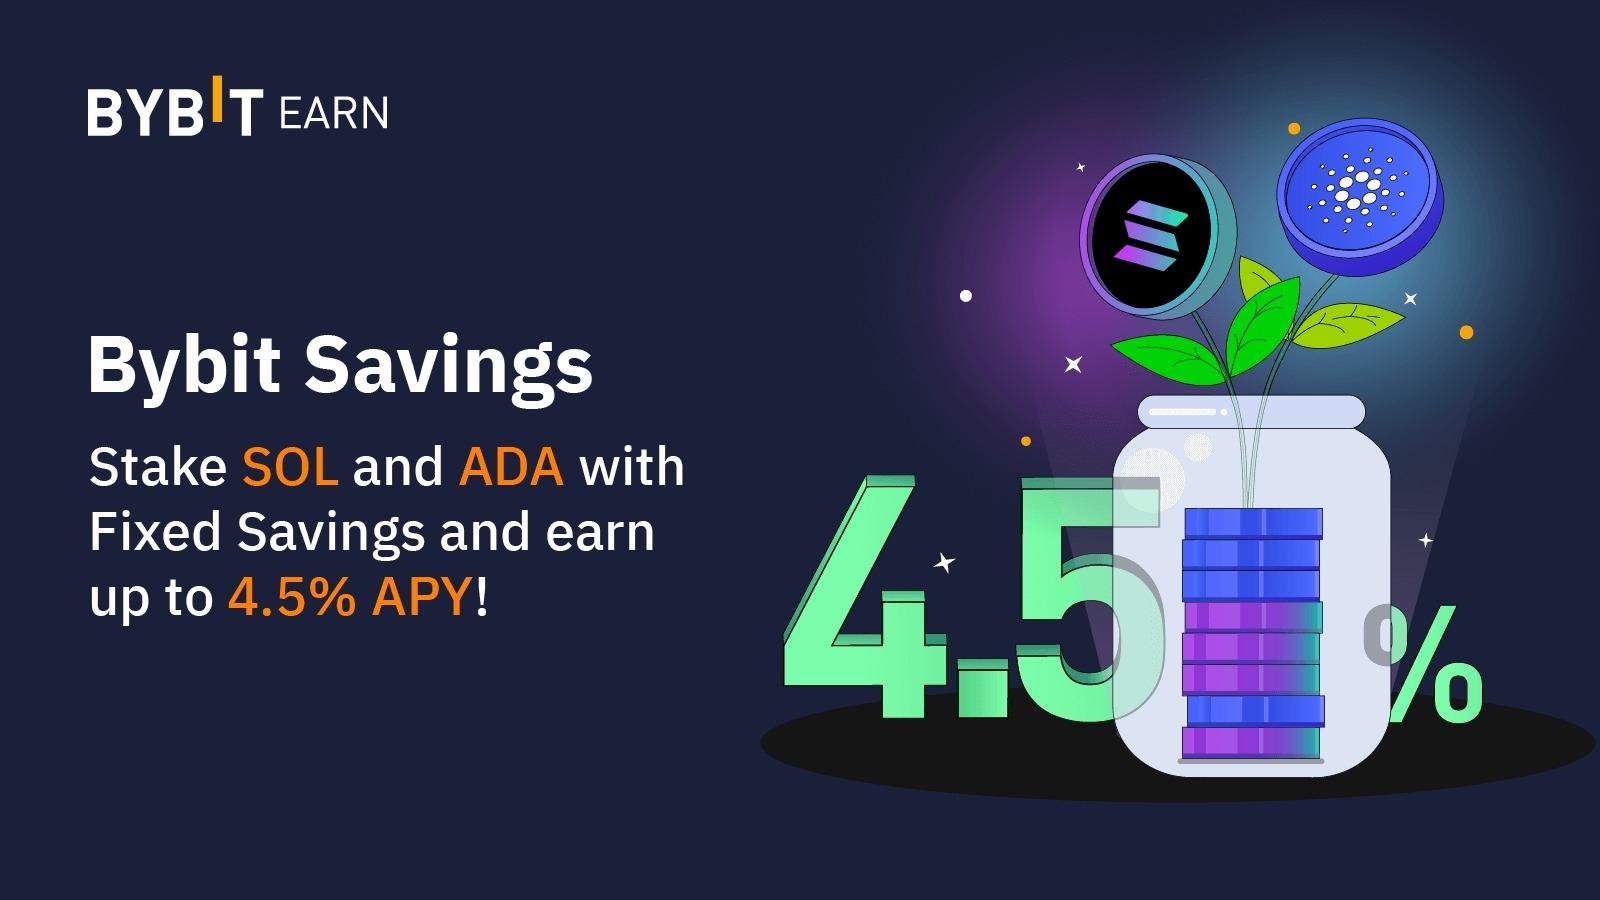 Bybit Savings: Stake SOL or ADA for up to 4.5% APY!